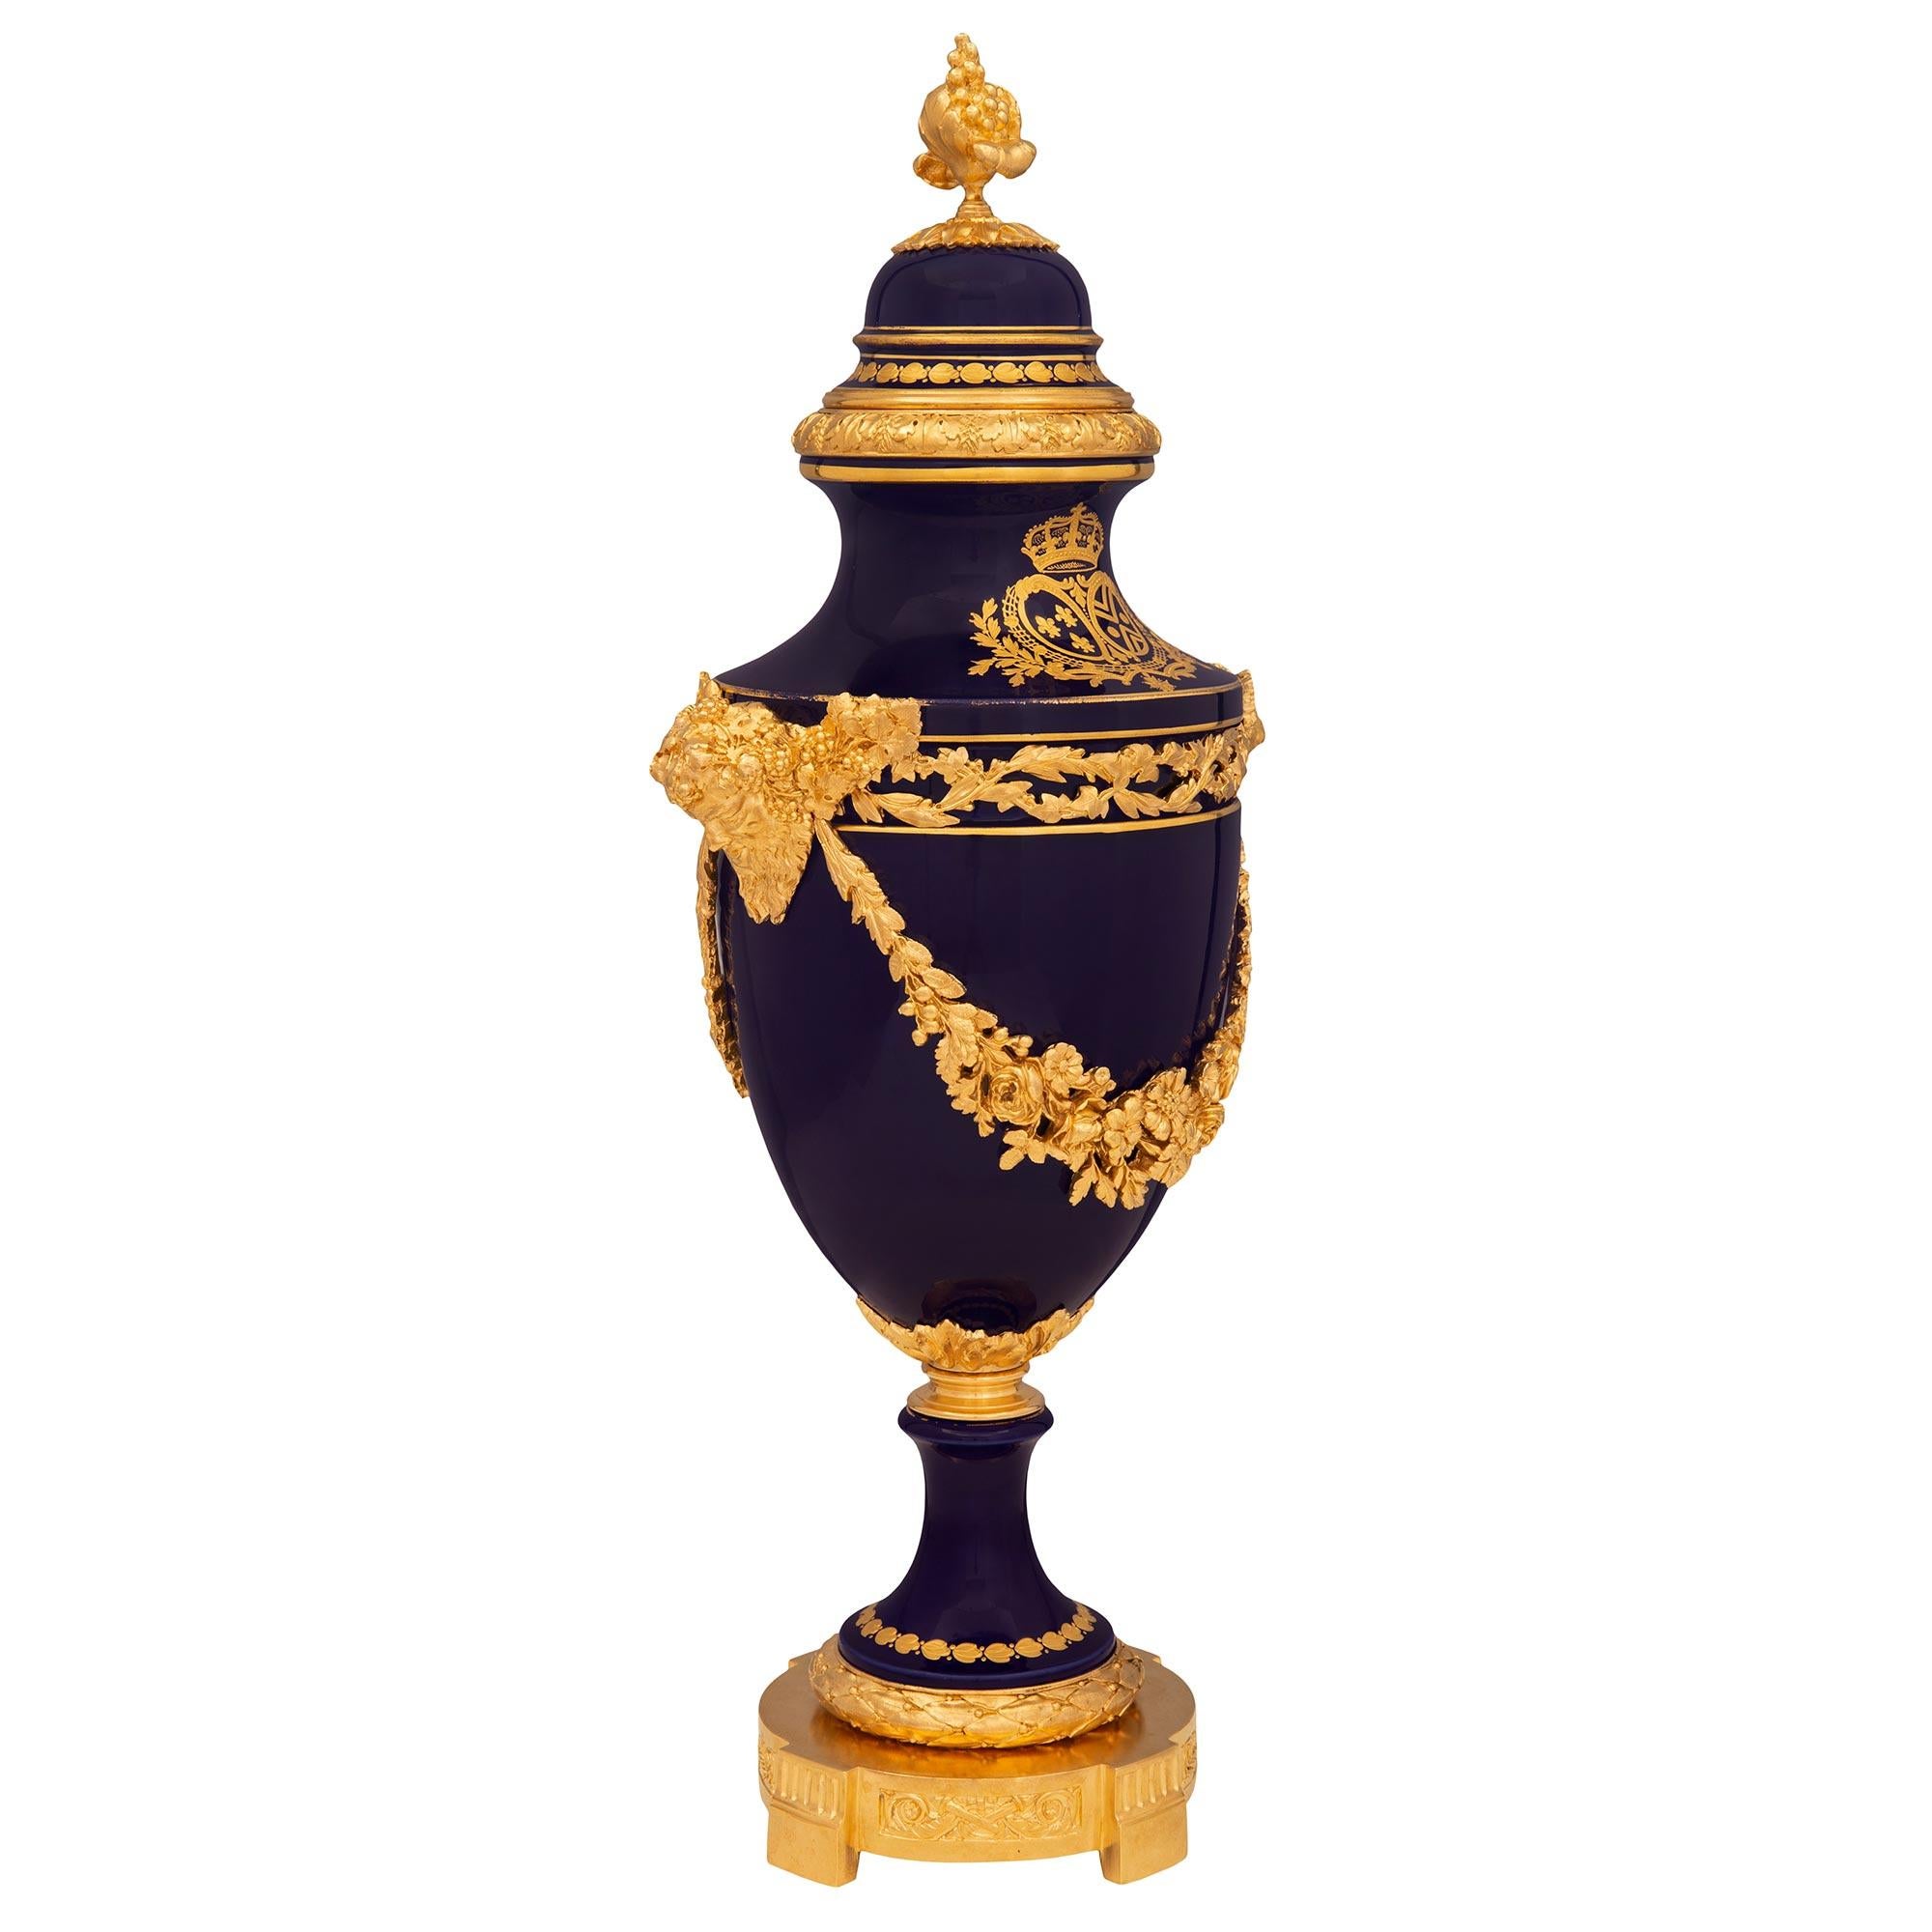 A stunning and very high quality French 19th century Louis XVI st. Belle Époque period cobalt blue Sèvres porcelain and ormolu lidded urn signed Sèvres. The urn is raised by a circular ormolu base with fine block and fluted feet. The elegant socle